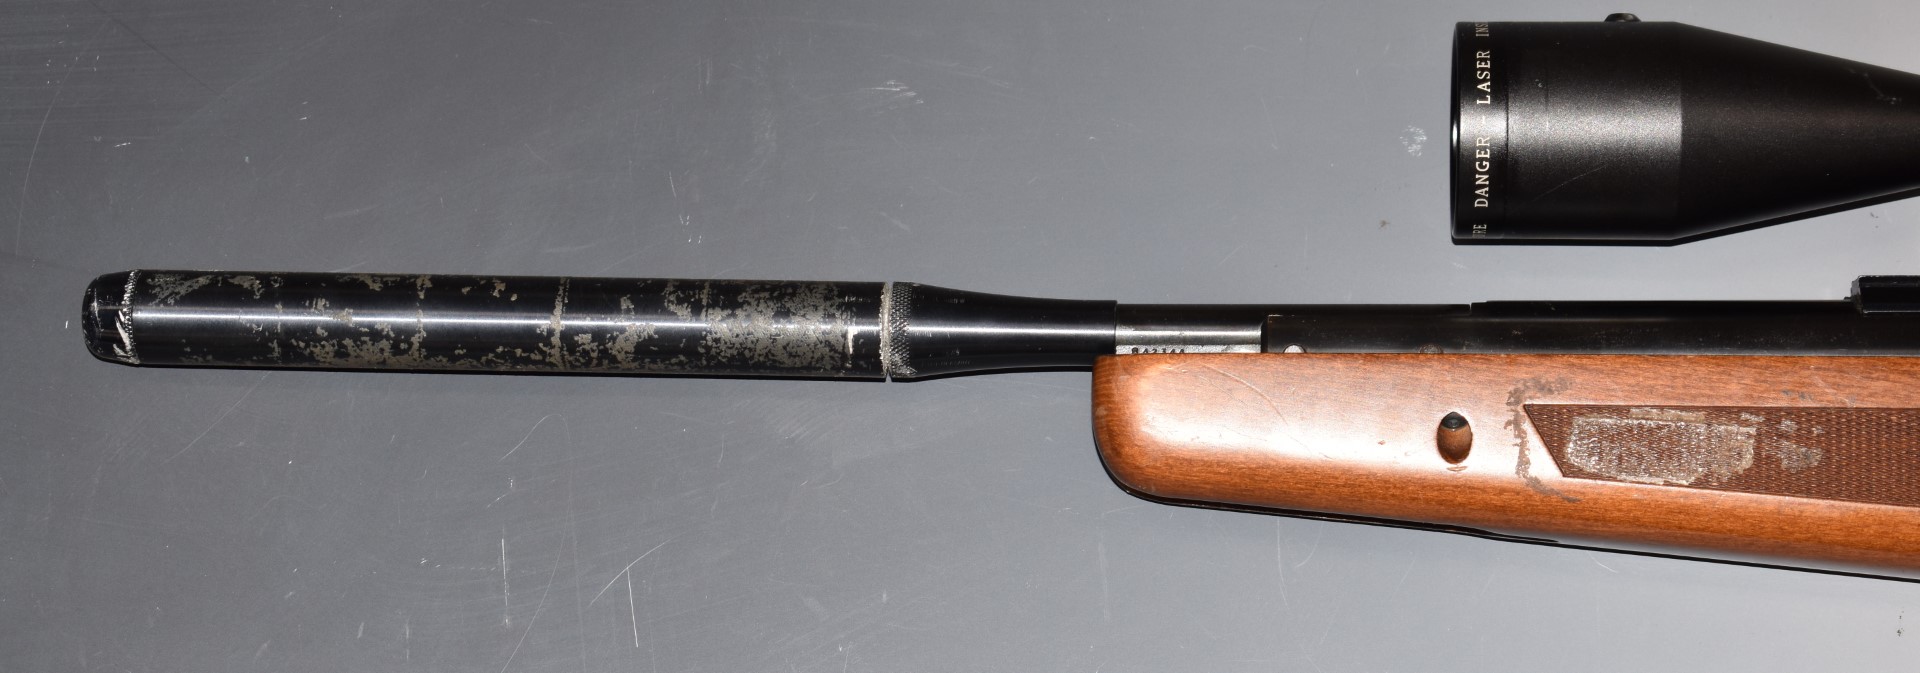 BSA .22 air rifle with chequered semi-pistol grip and forend, raised cheek piece, sound moderator - Image 9 of 10